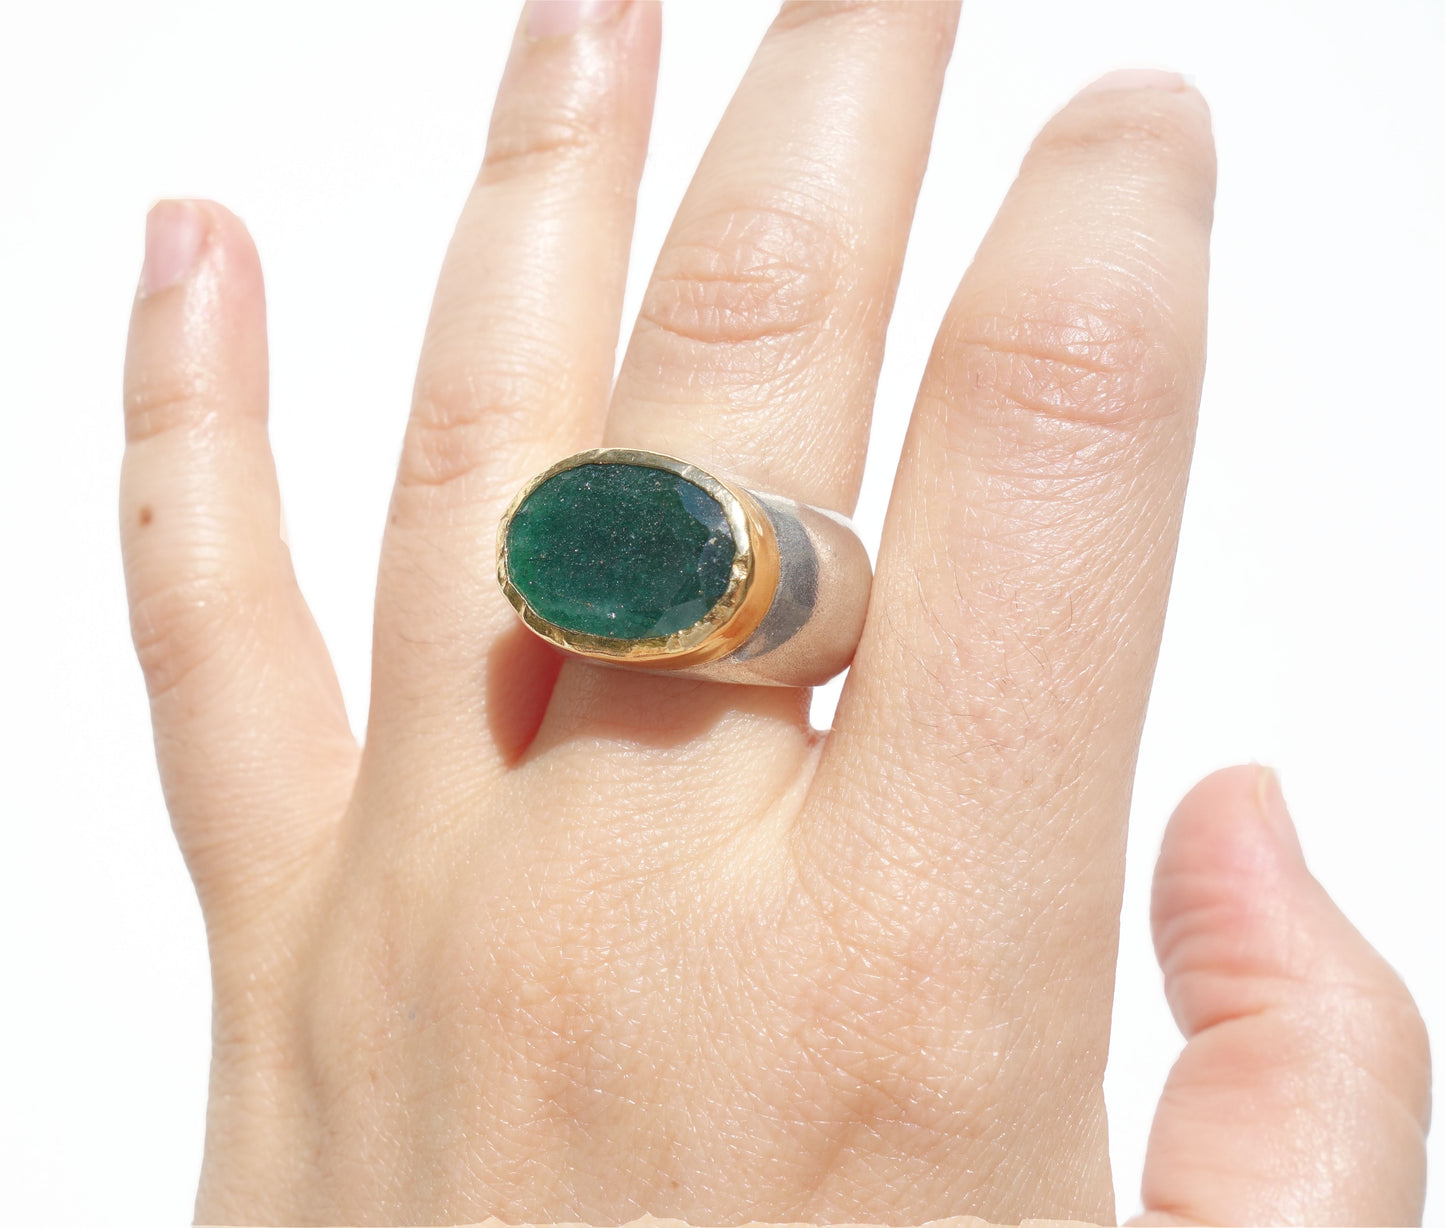 Oval natural Emerald ring, sterling silver ring with natural Emerald gemstone decorated with Gold, READY TO SHIP Size 8us